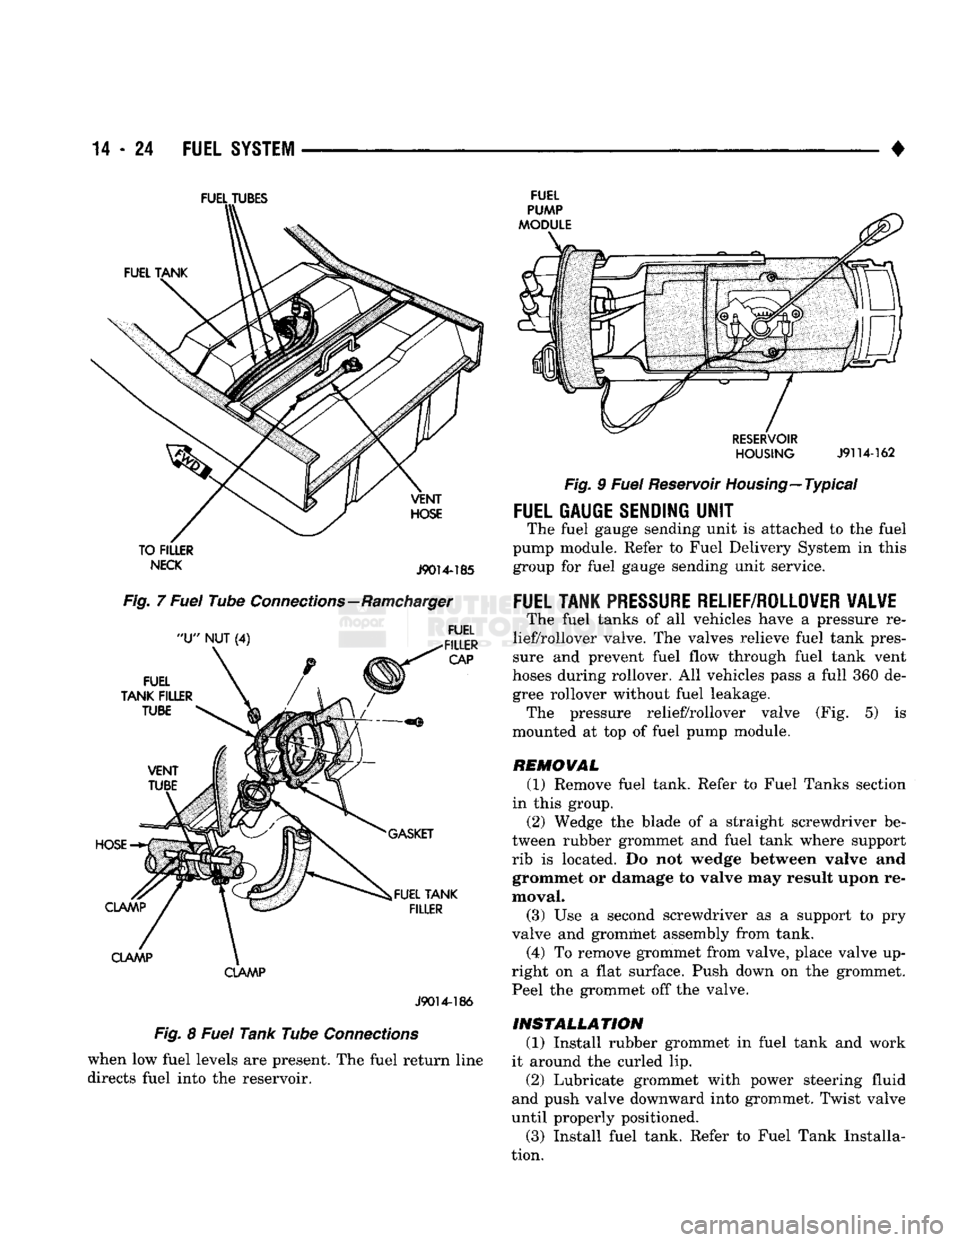 DODGE TRUCK 1993  Service Repair Manual 
14
 - 24
 FUEL
 SYSTEM 

• 

FUEL
 TUBES 

TO FILLER 
 NECK
 J9014-185 

Fig. 7 Fuel Tube Connections—Ramcharger 

CLAMP 
 J9014-186 

Fig. 8 Fuel Tank Tube Connections  when low fuel levels are 